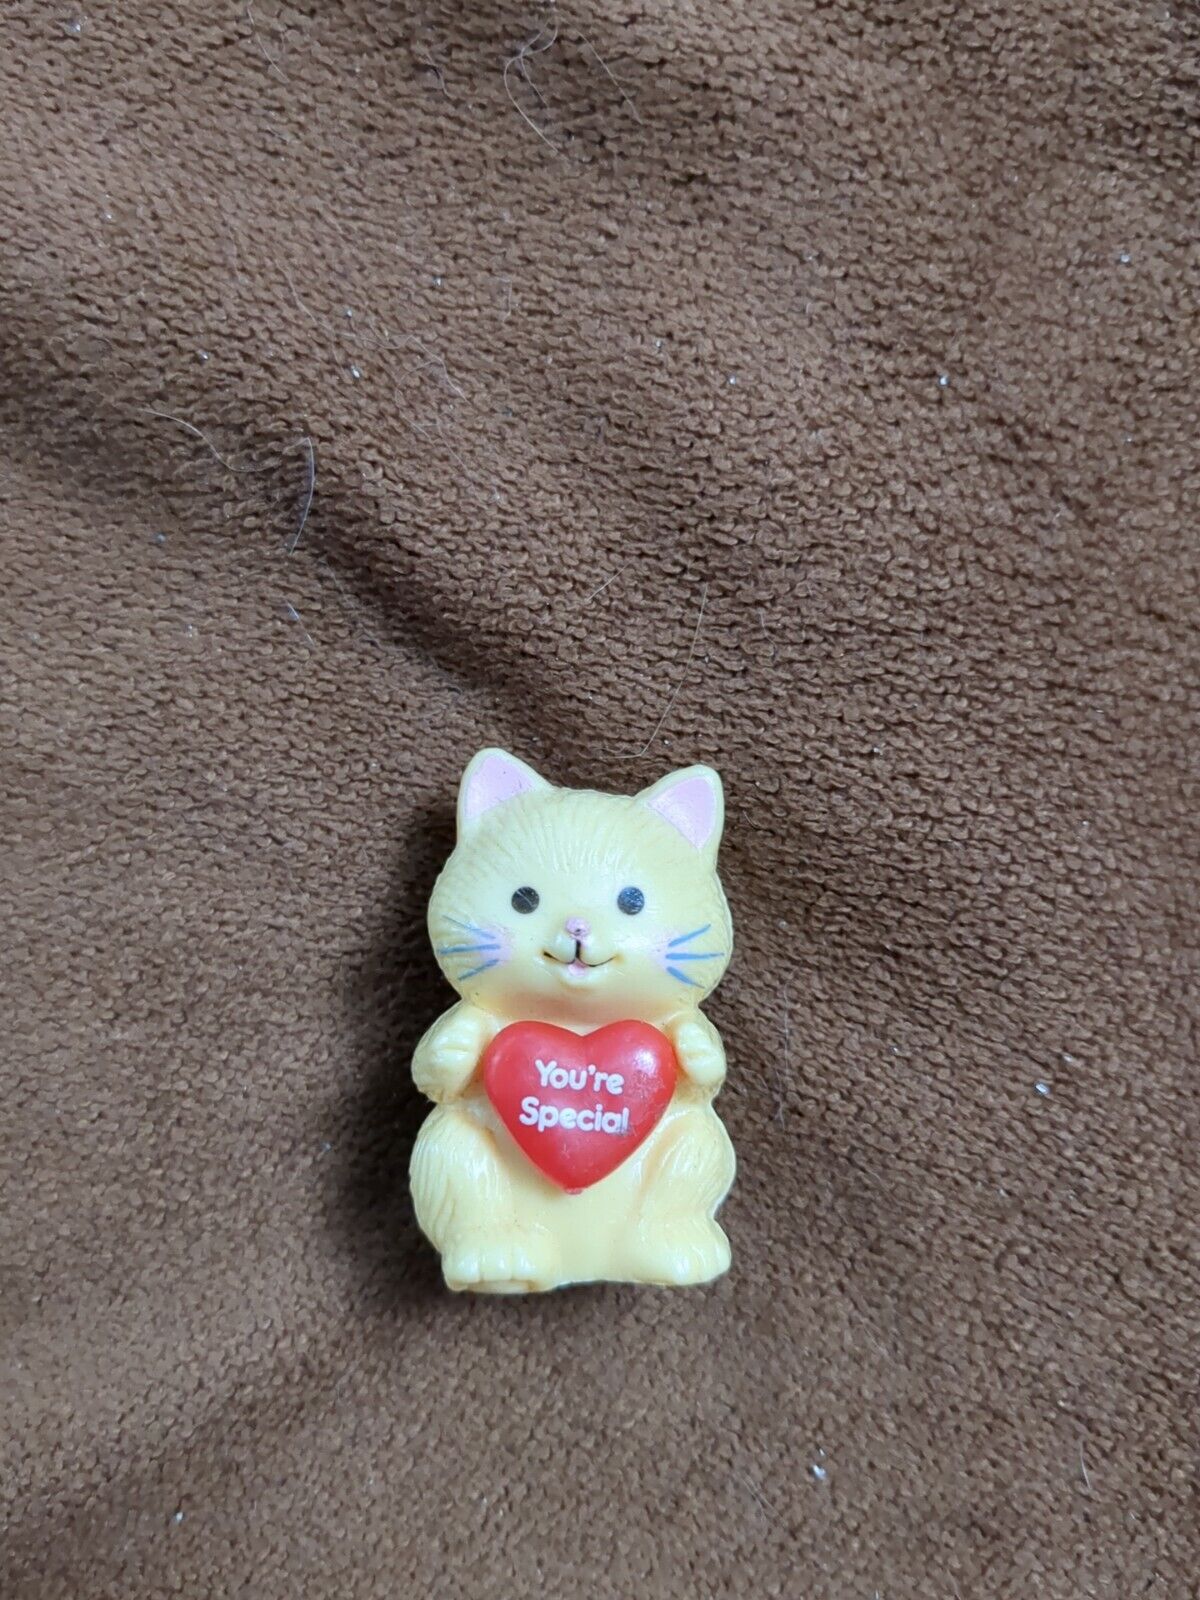 Vintage Russ You're Special Cat Figure 1.75 Inch